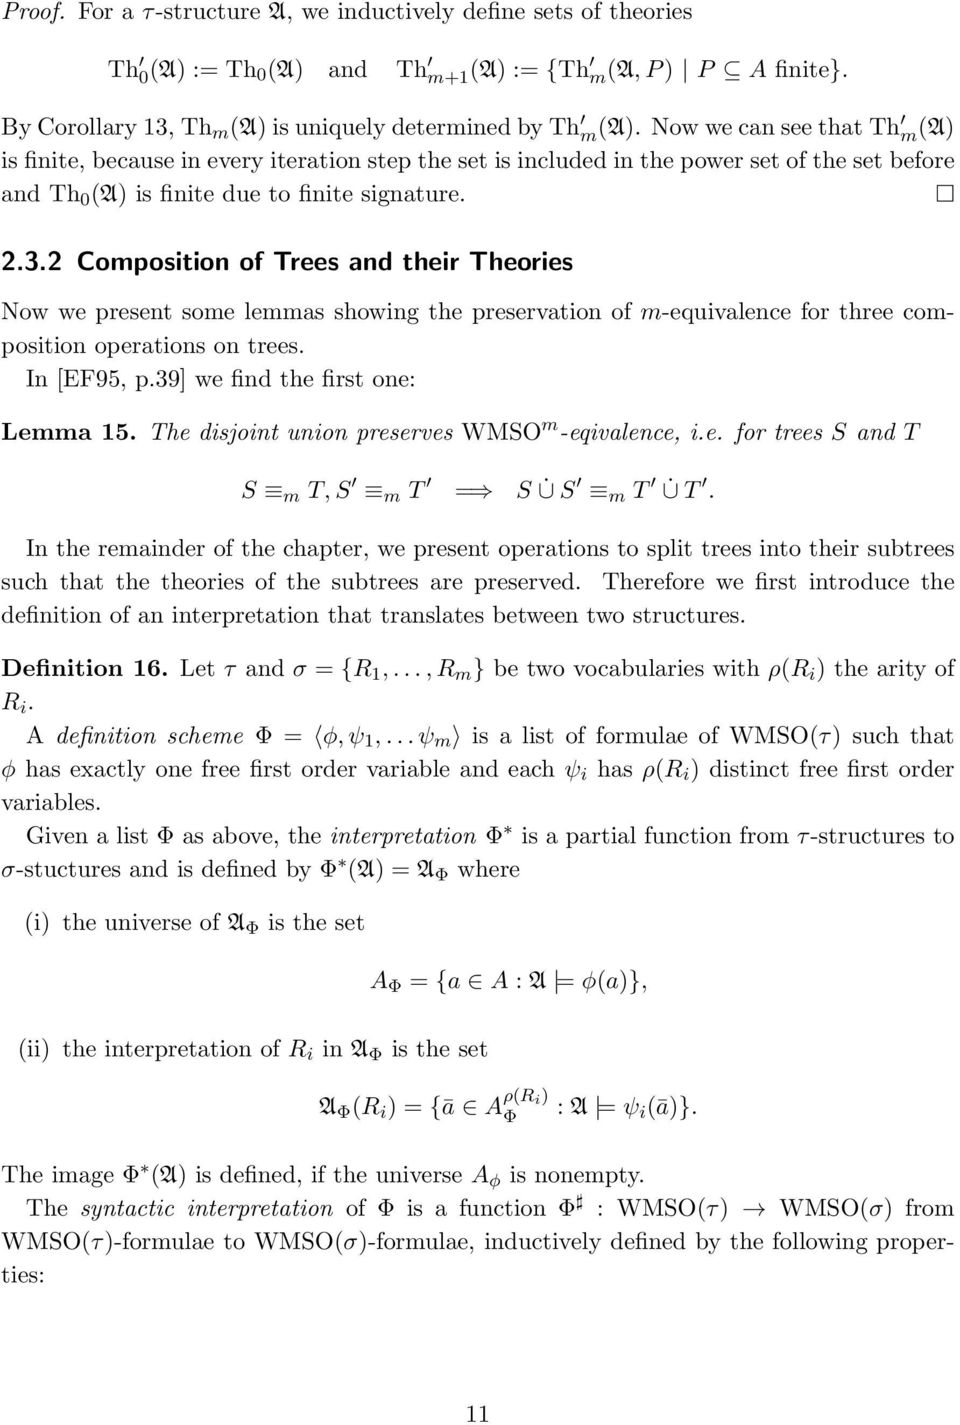 2 Composition of Trees and their Theories Now we present some lemmas showing the preservation of m-equivalence for three composition operations on trees. In [EF95, p.